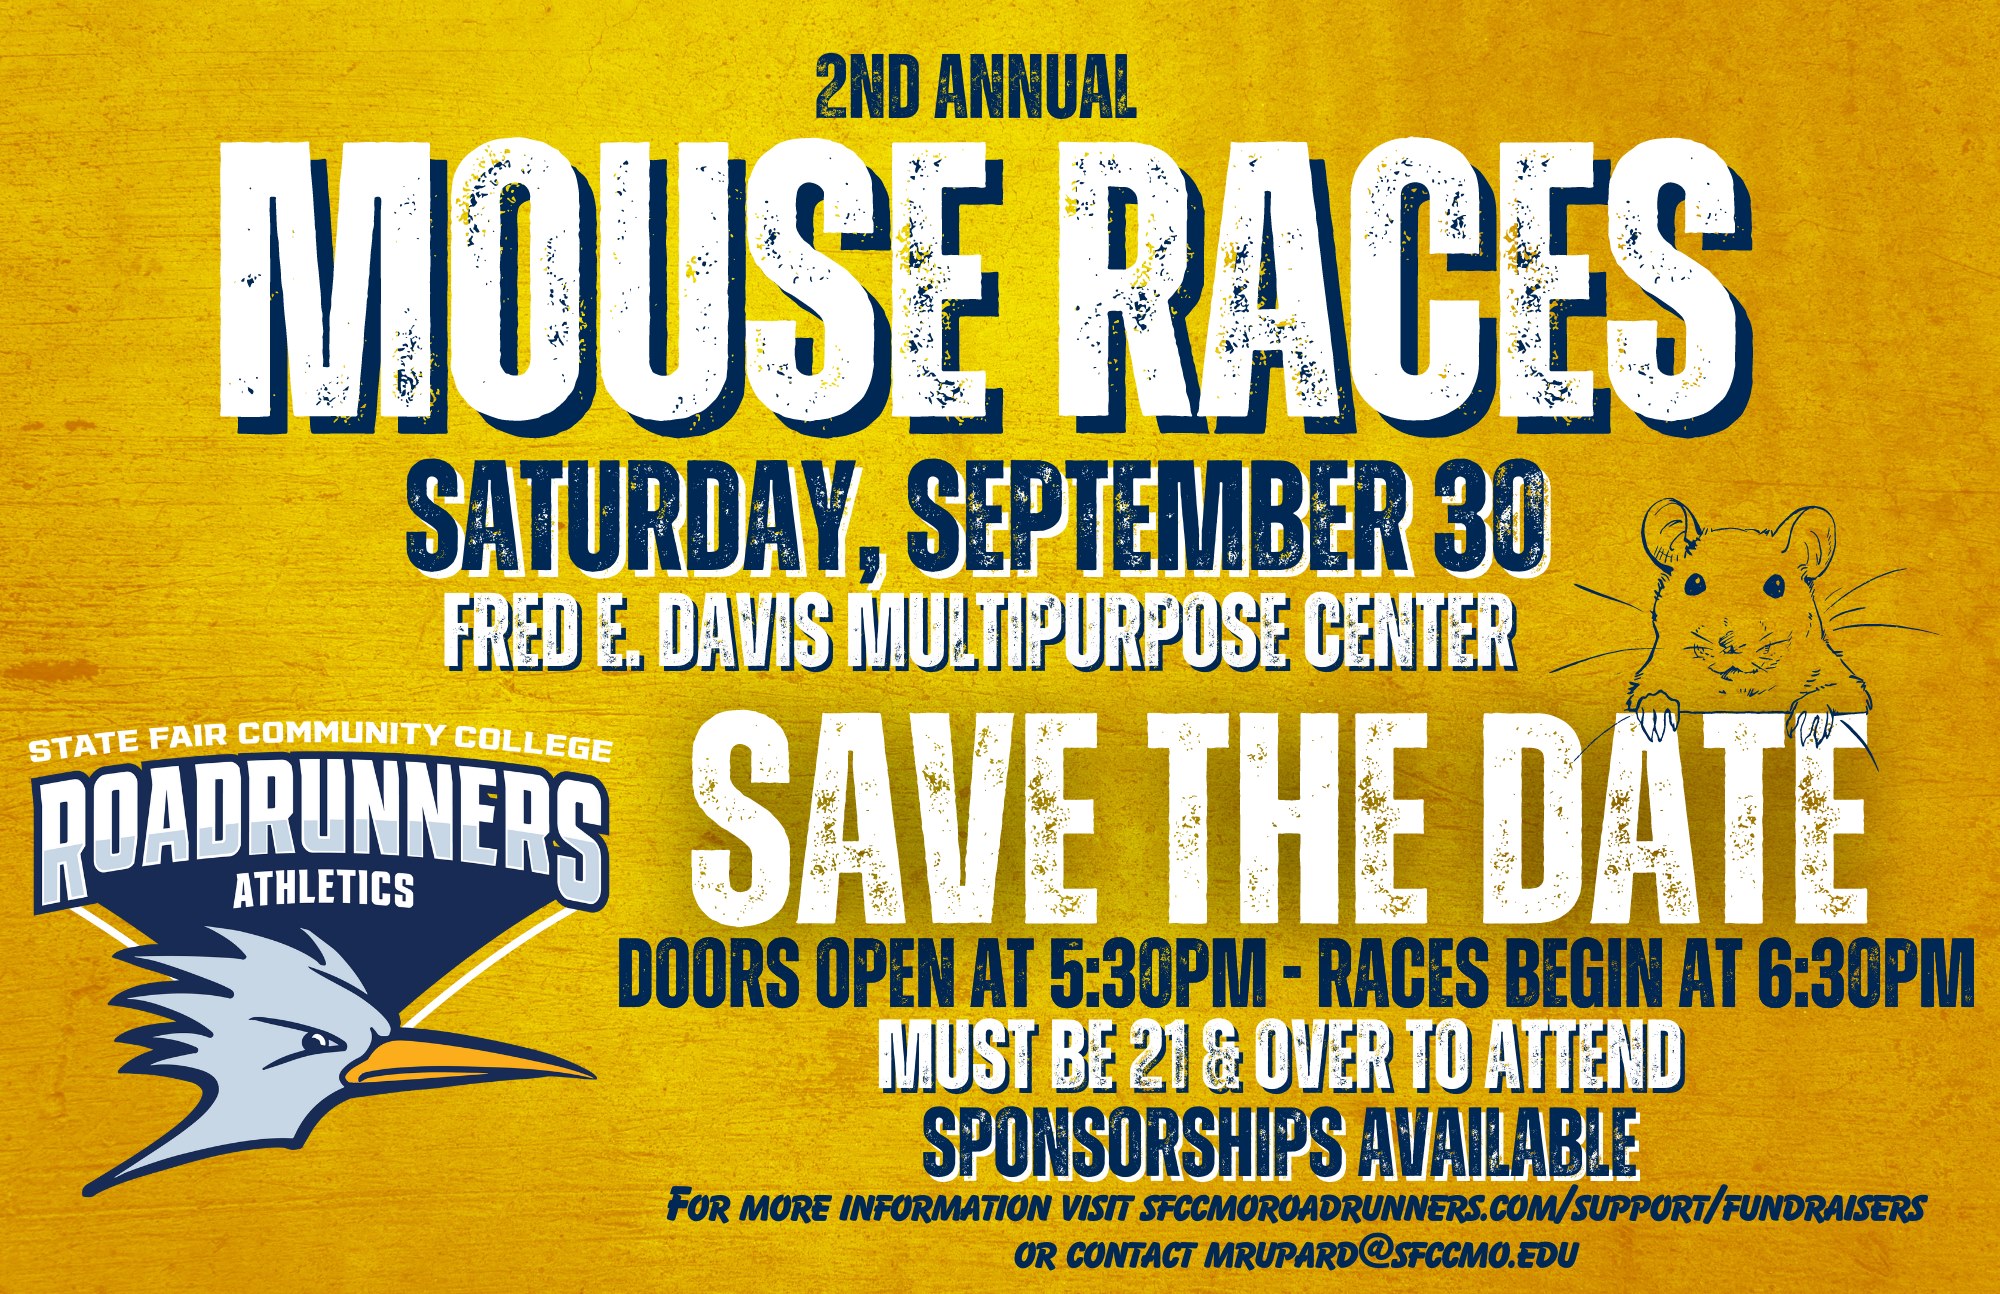 Read more about SFCC Athletics to host second annual Mouse Races